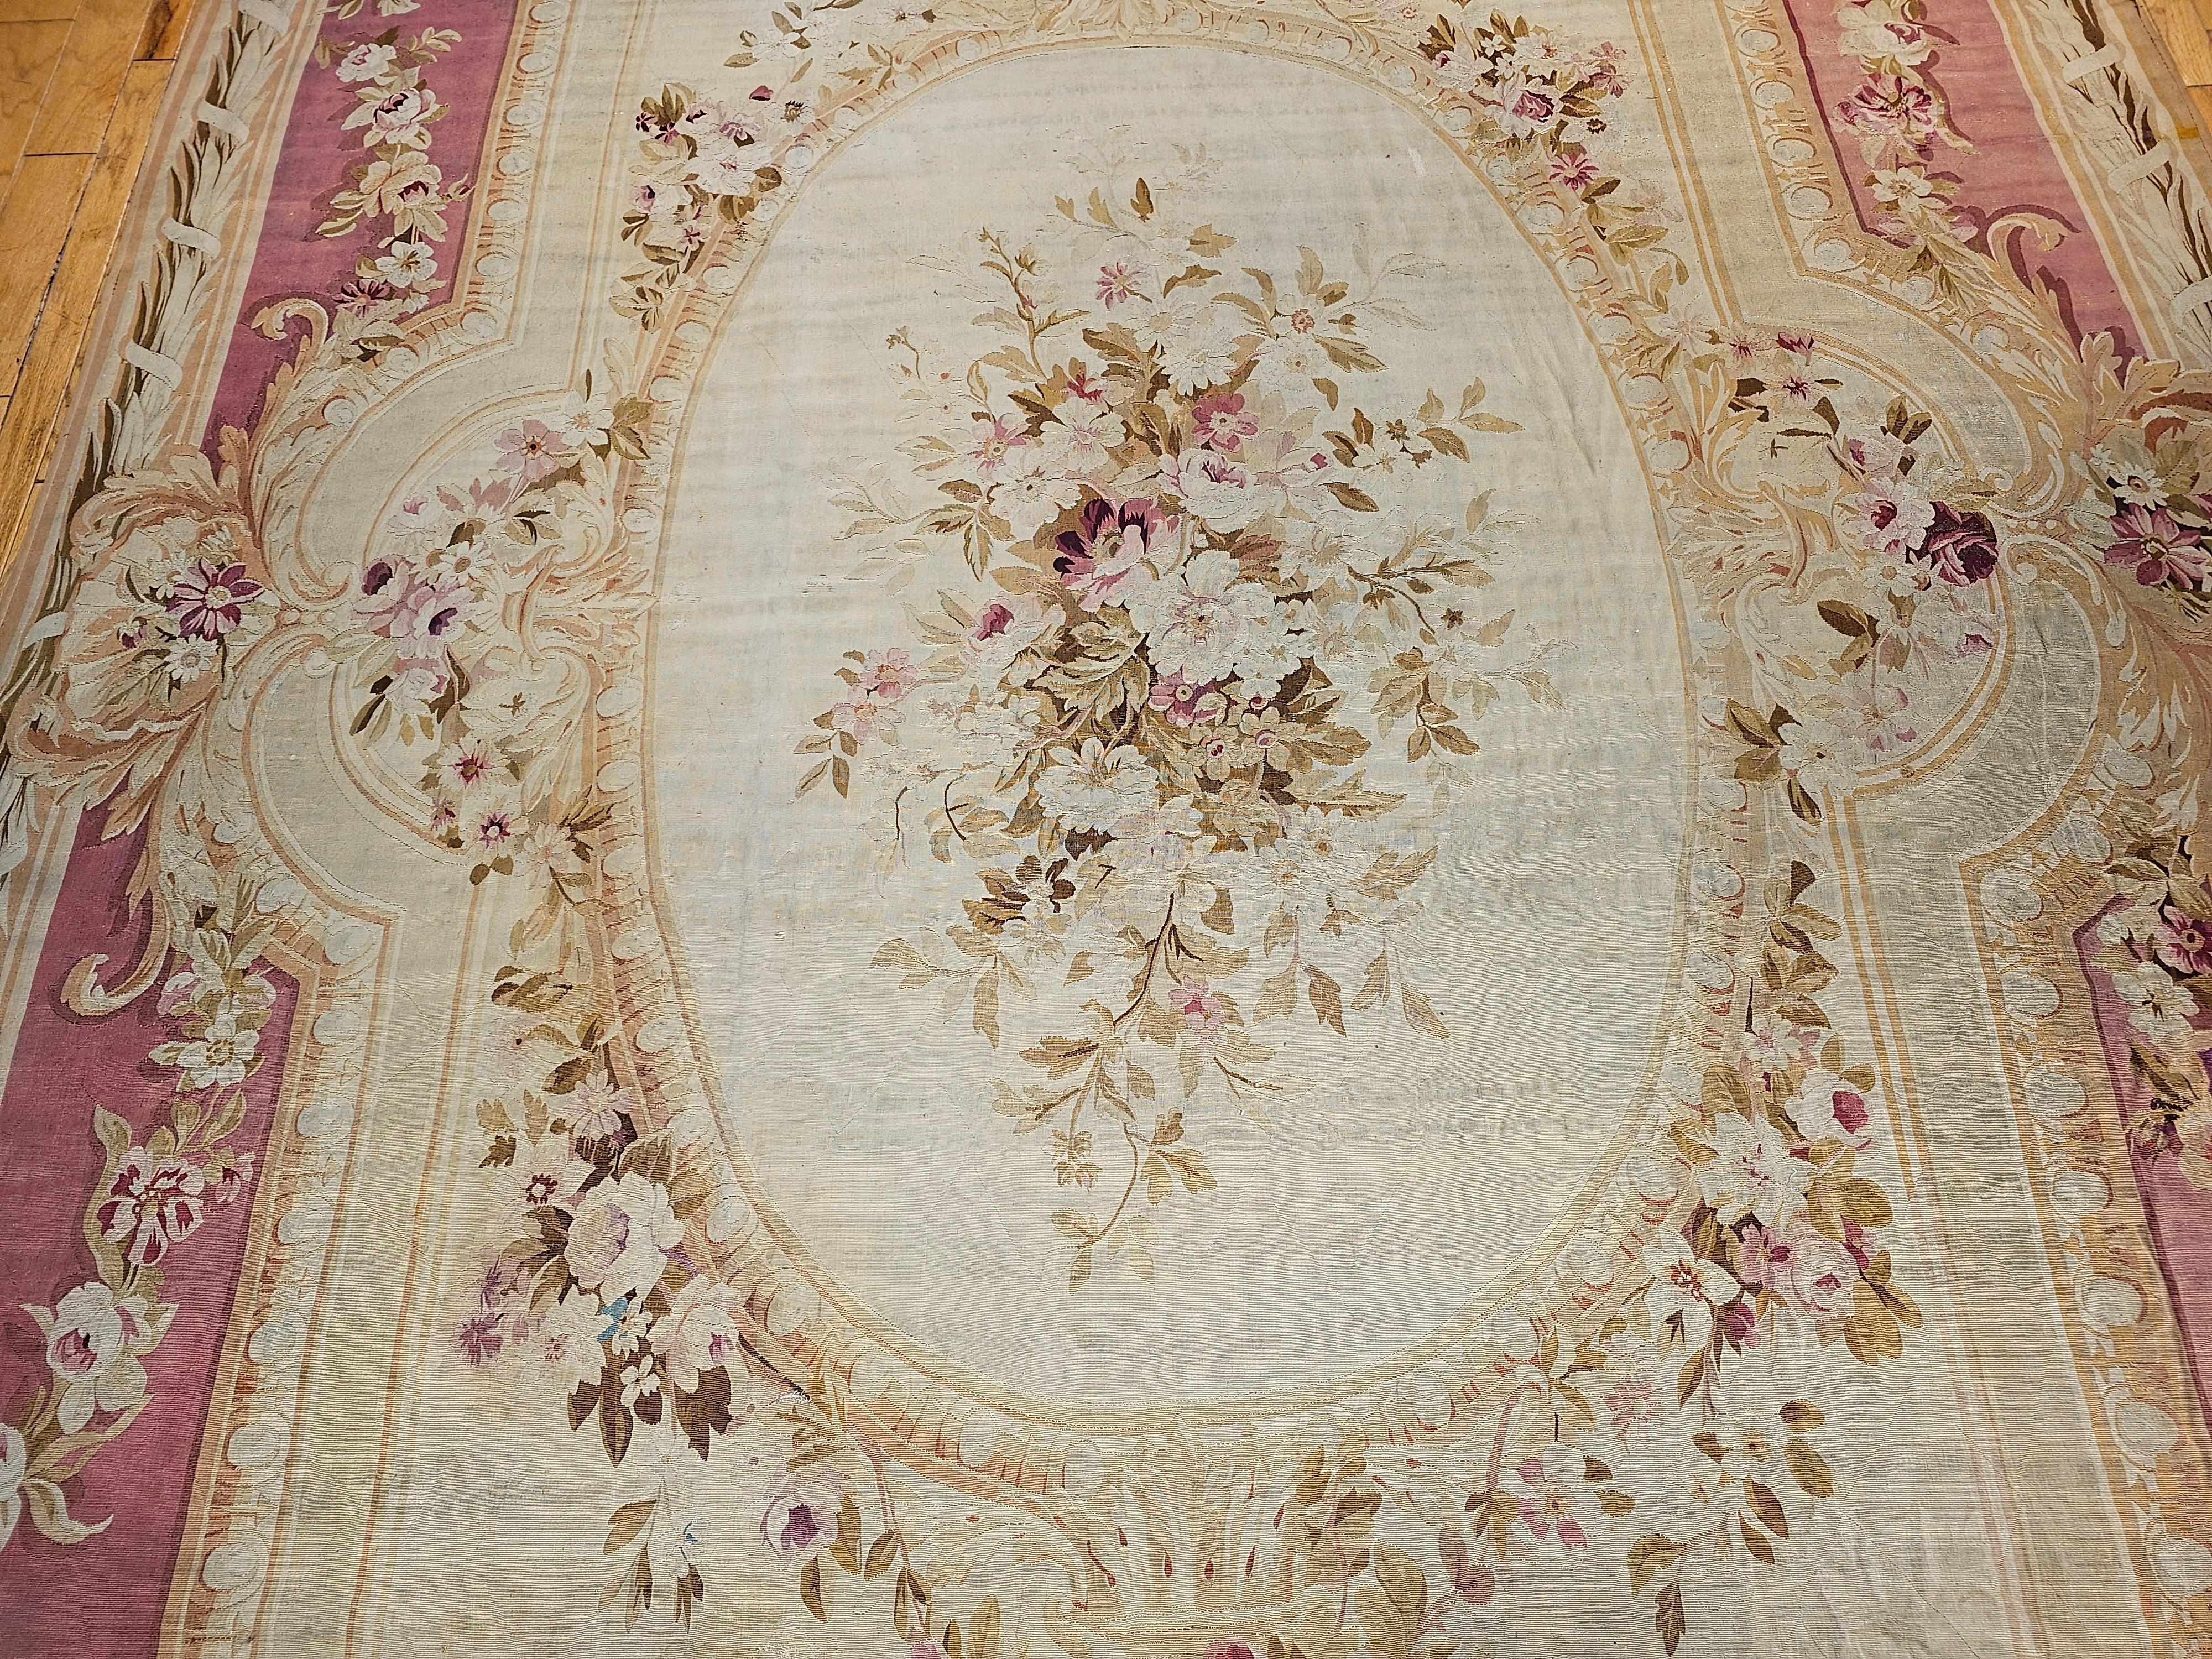 19th Century Oversize French Aubusson in Floral Pattern in Ivory, Red, Pink In Good Condition For Sale In Barrington, IL